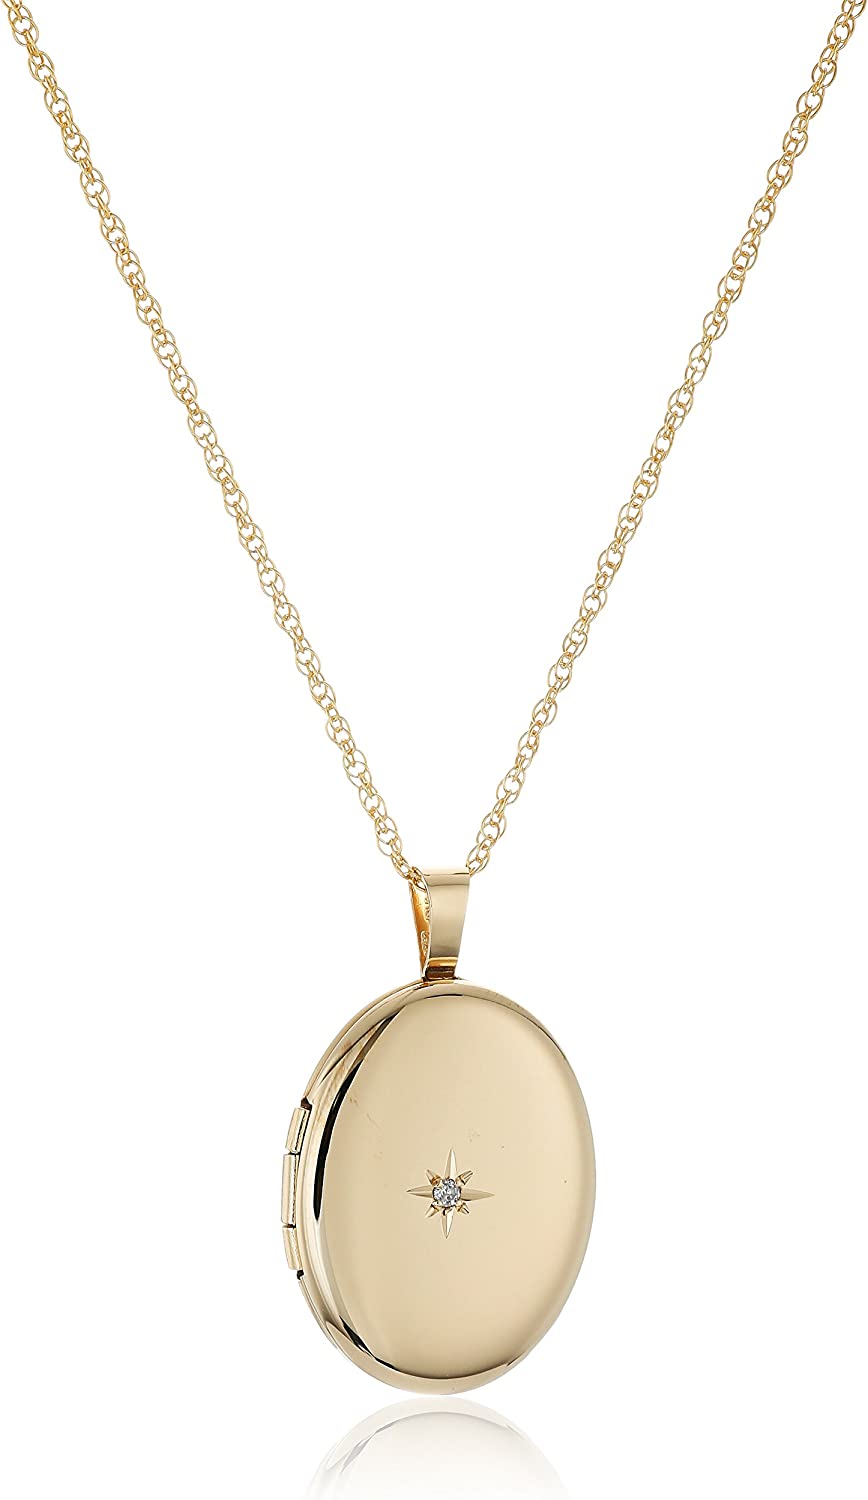 Amazon Collection 14k Gold-Filled Polished Oval Pendant with Genuine Diamond Locket Necklace, 18"